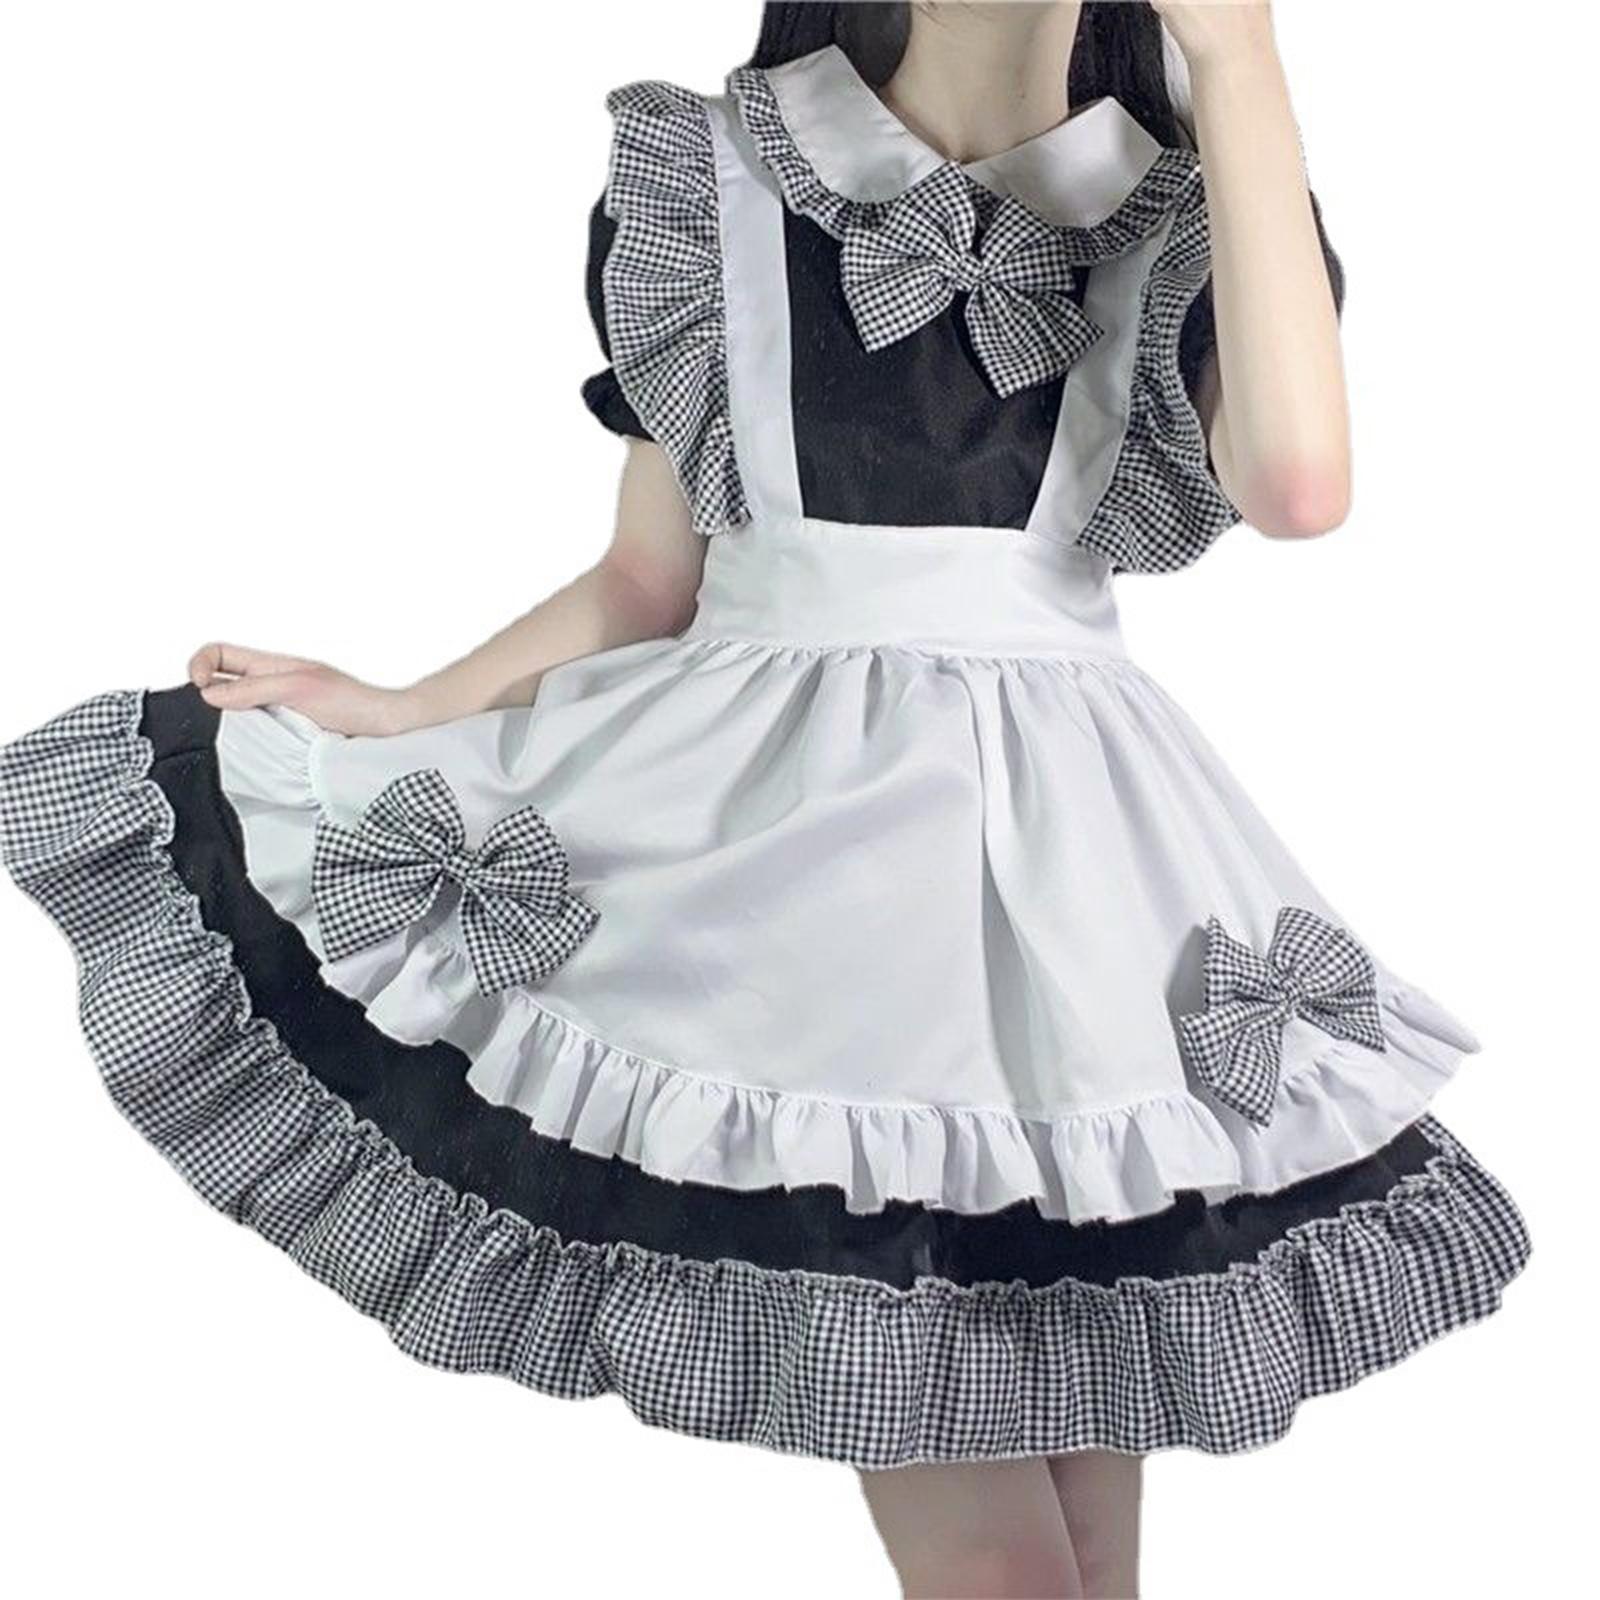 Mua Women's French Maid Costume with Apron, Anime Cosplay Fancy Dress for  Halloween Party - XL tại Magideal